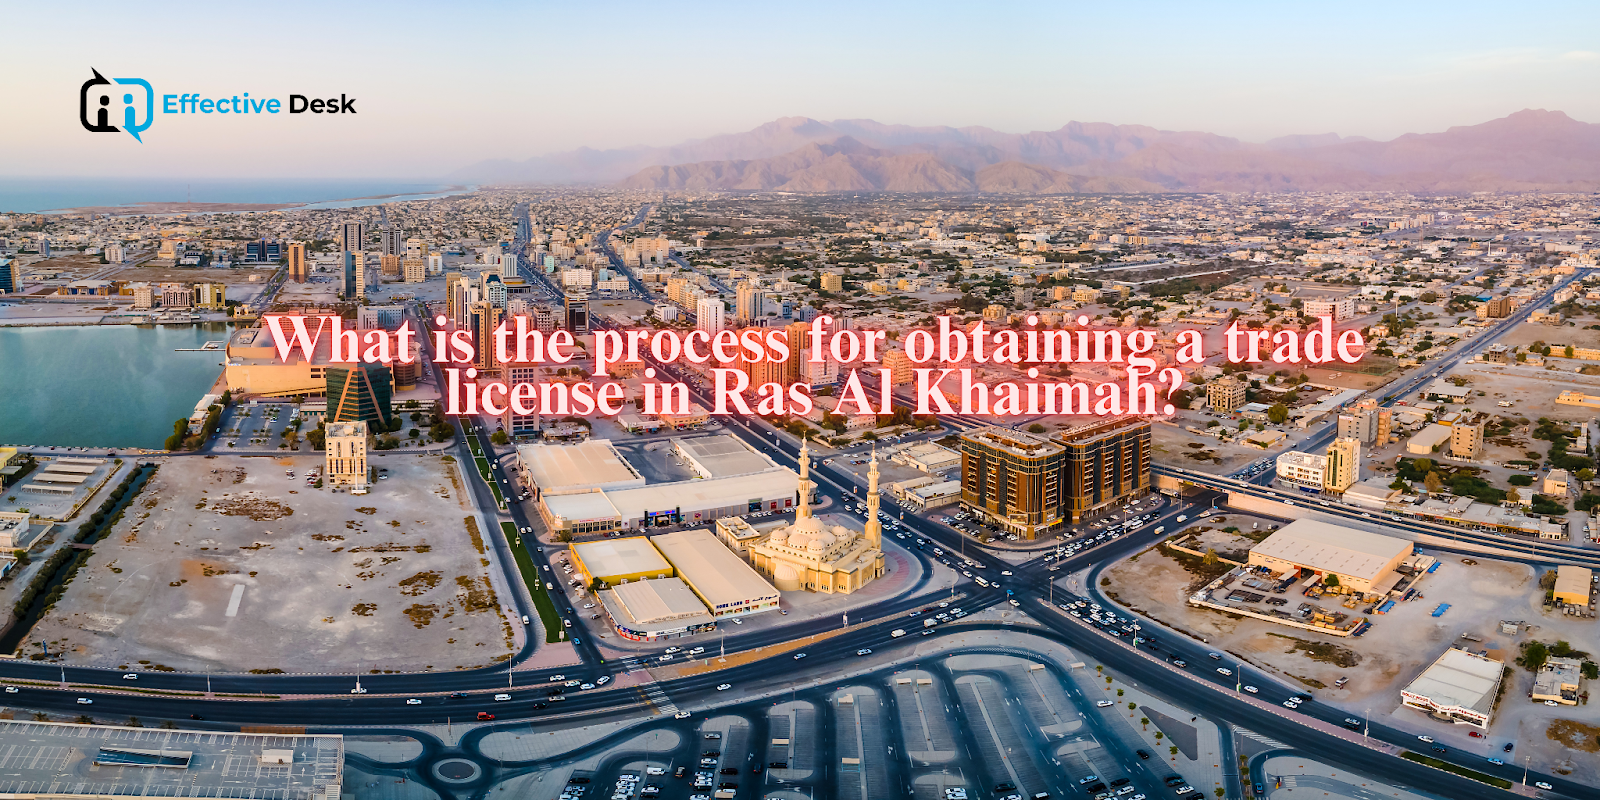 What is the process for obtaining a trade license in Ras Al Khaimah?
